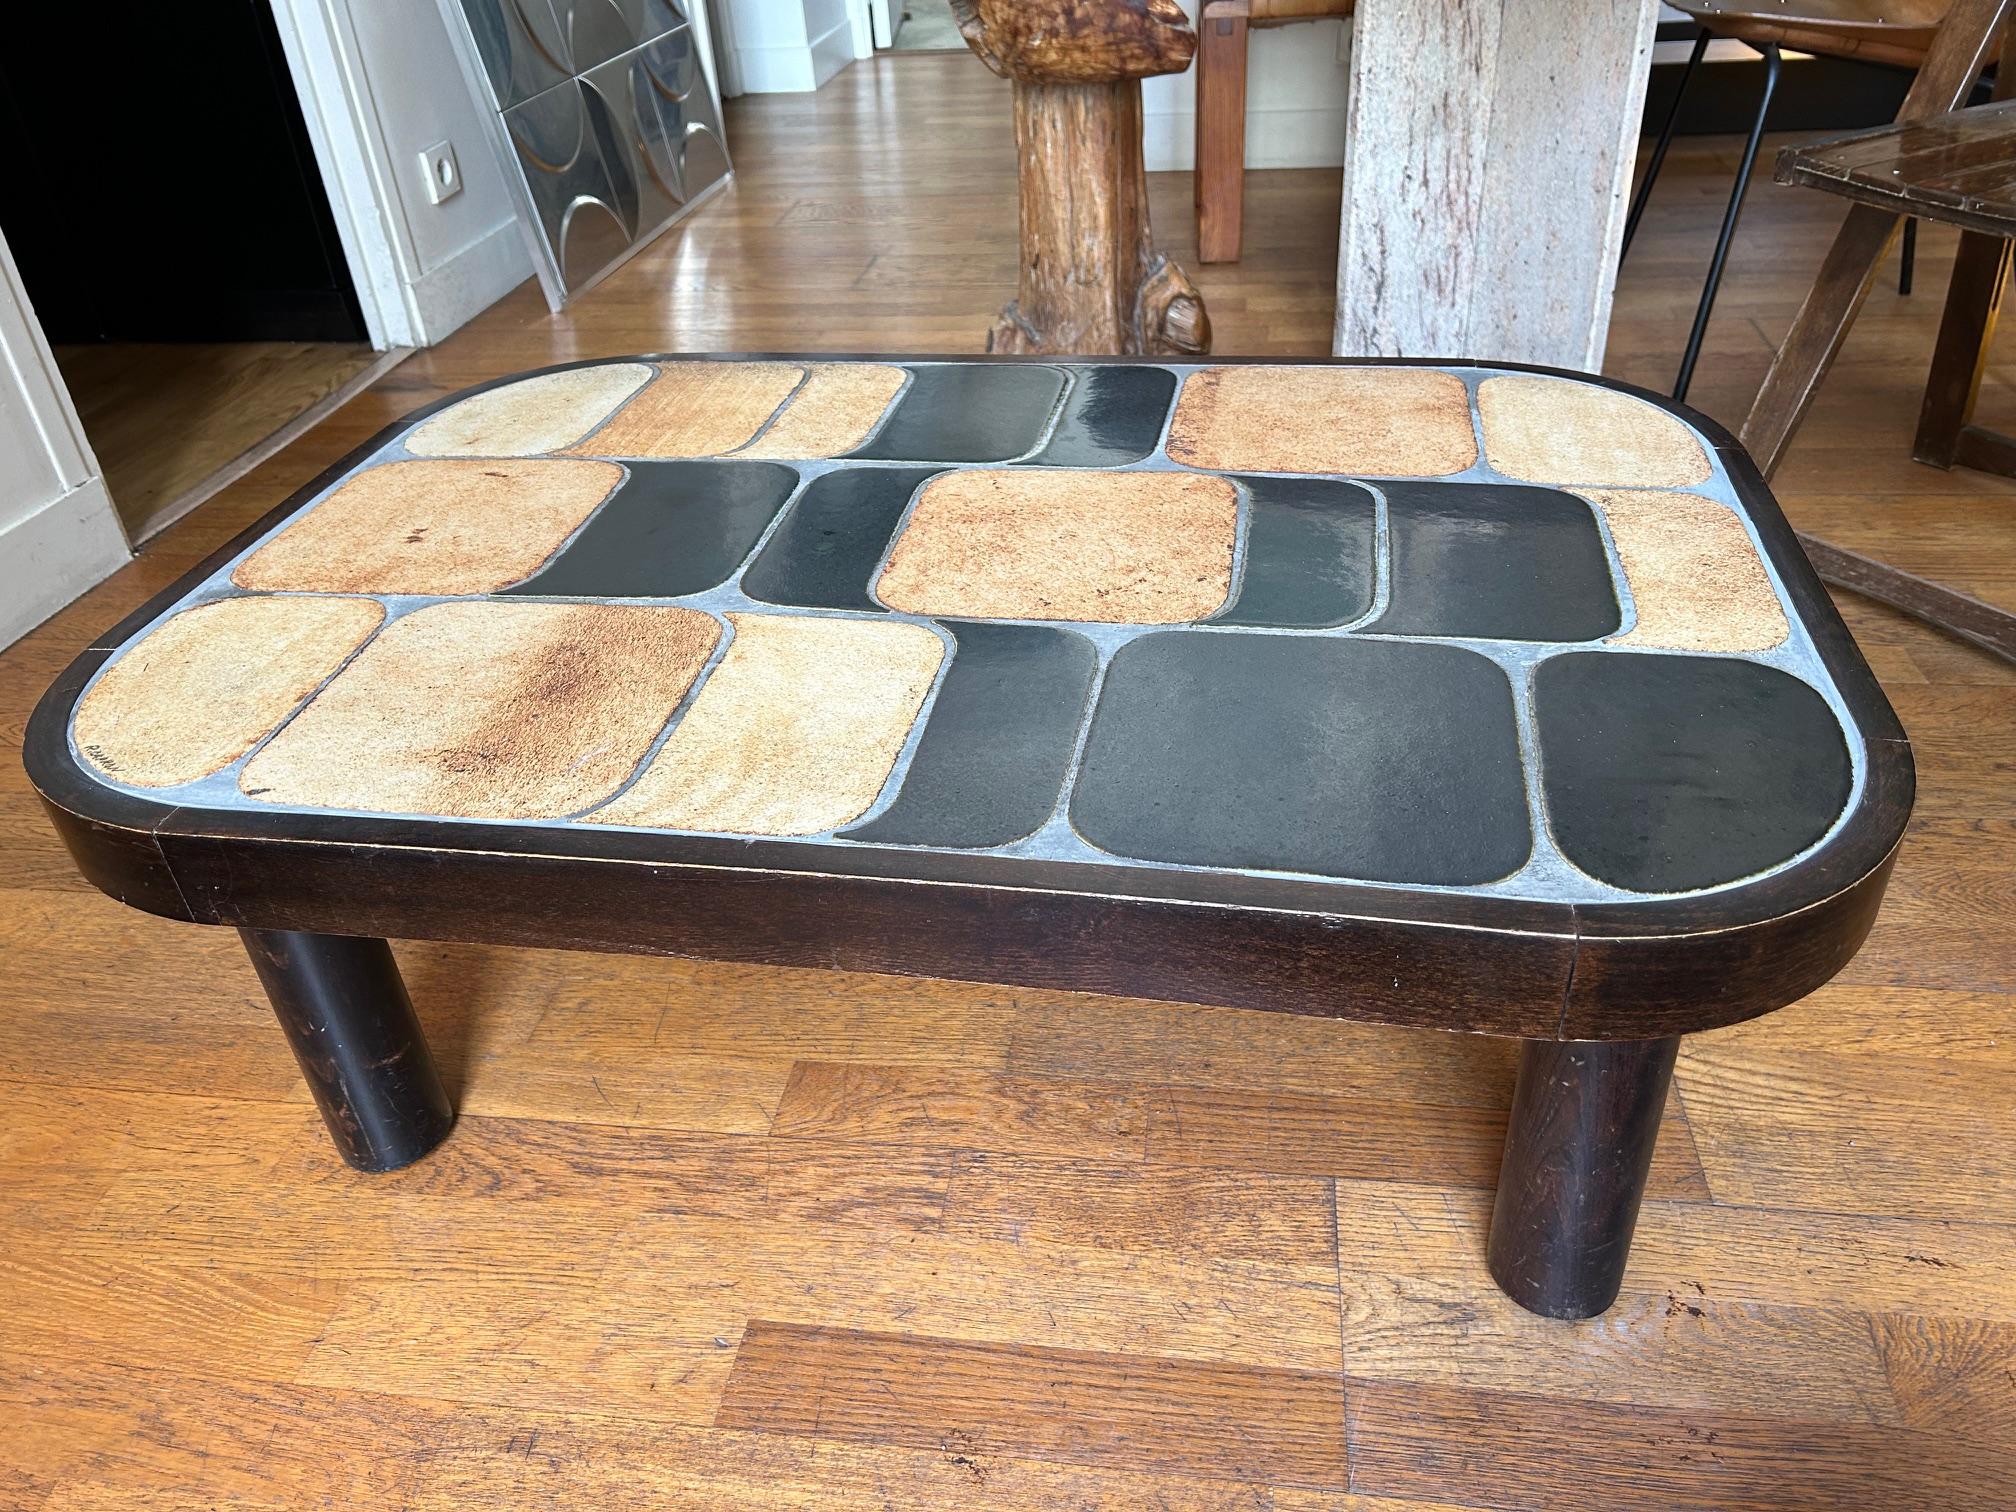 Mid-20th Century Ceramic Shogun coffee table by Roger Capron, France, 1960's For Sale